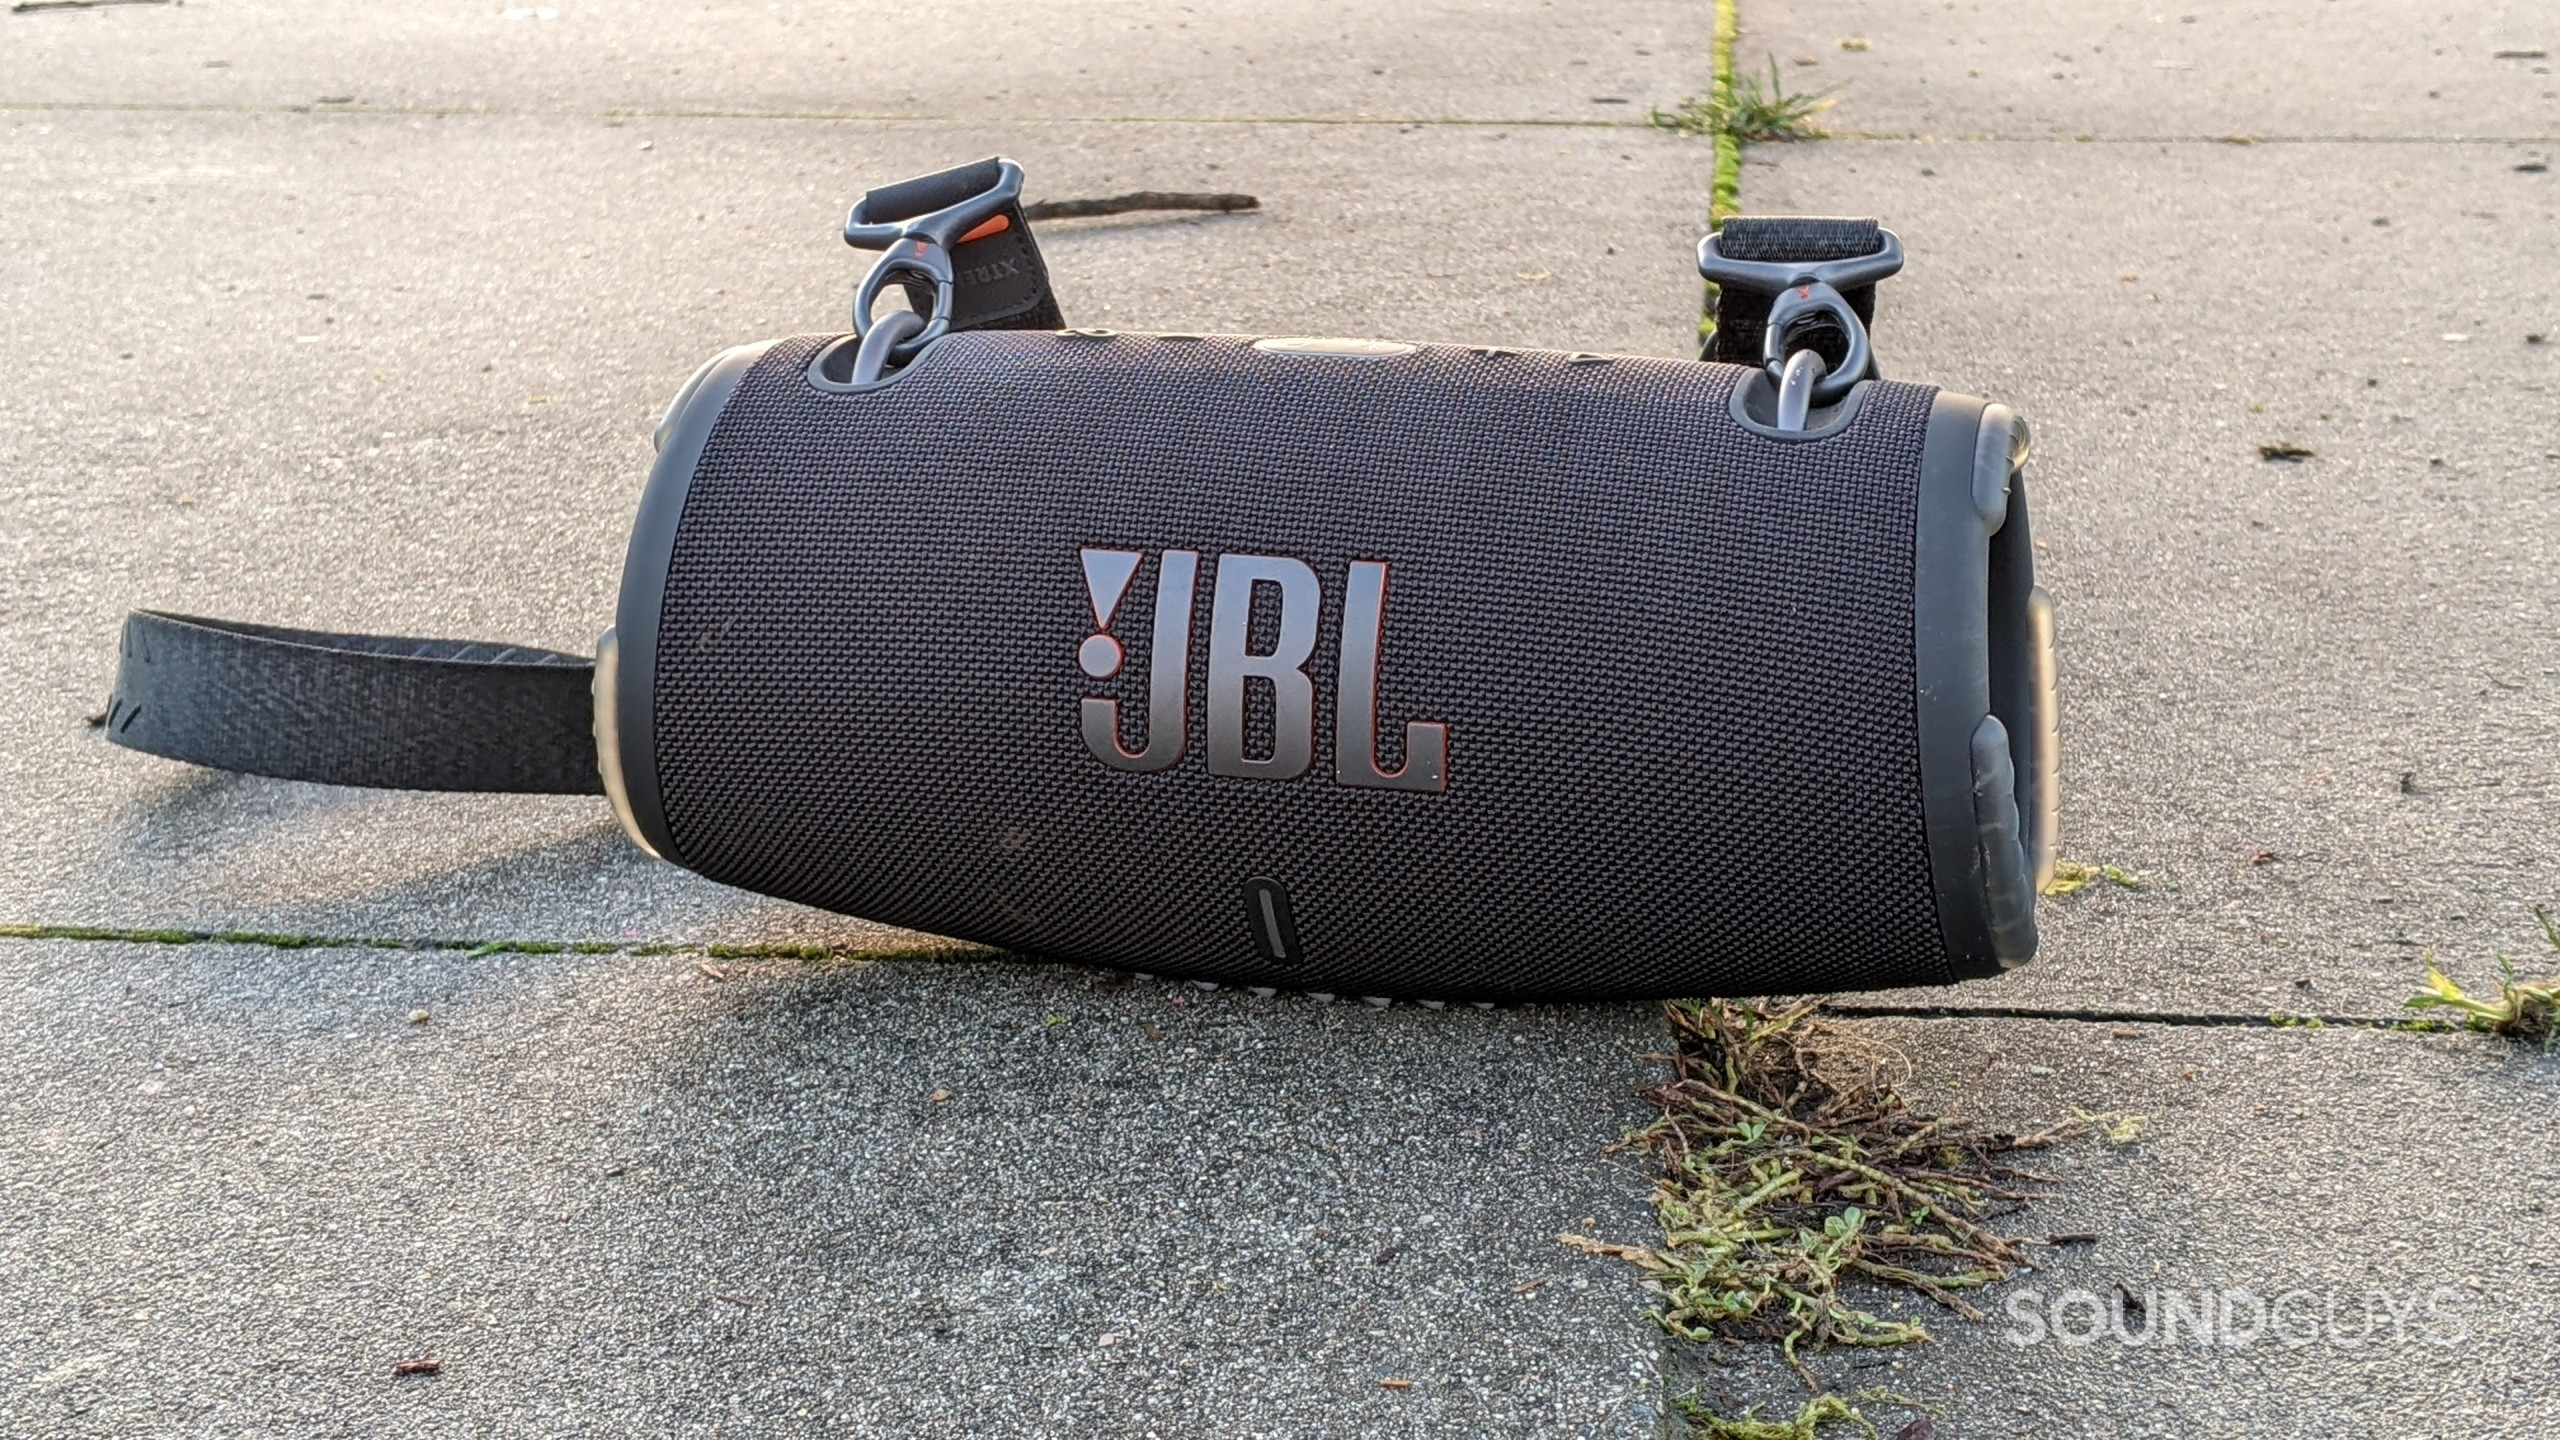 The JBL Xtreme 3 Bluetooth speaker sitting on concrete on a sunny day.